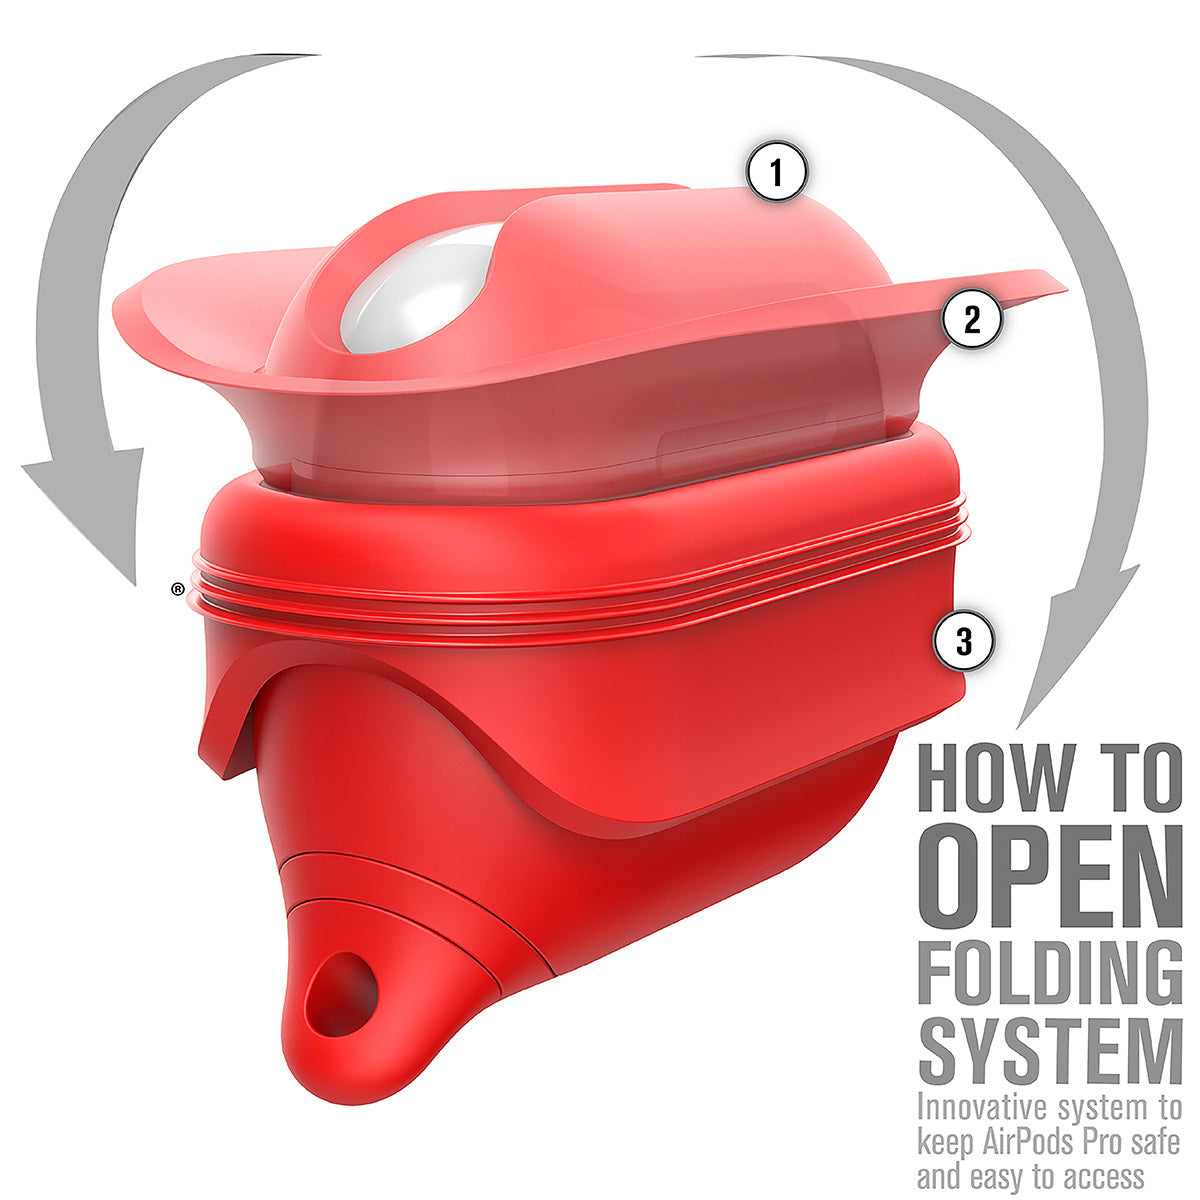 CATAPLAPDPRORED | catalyst airpods pro gen 2 1 waterproof case carabiner special edition red with arrows on how to open the case text reads how to open folding system innovative system to keep airpods pro safe and easy to access